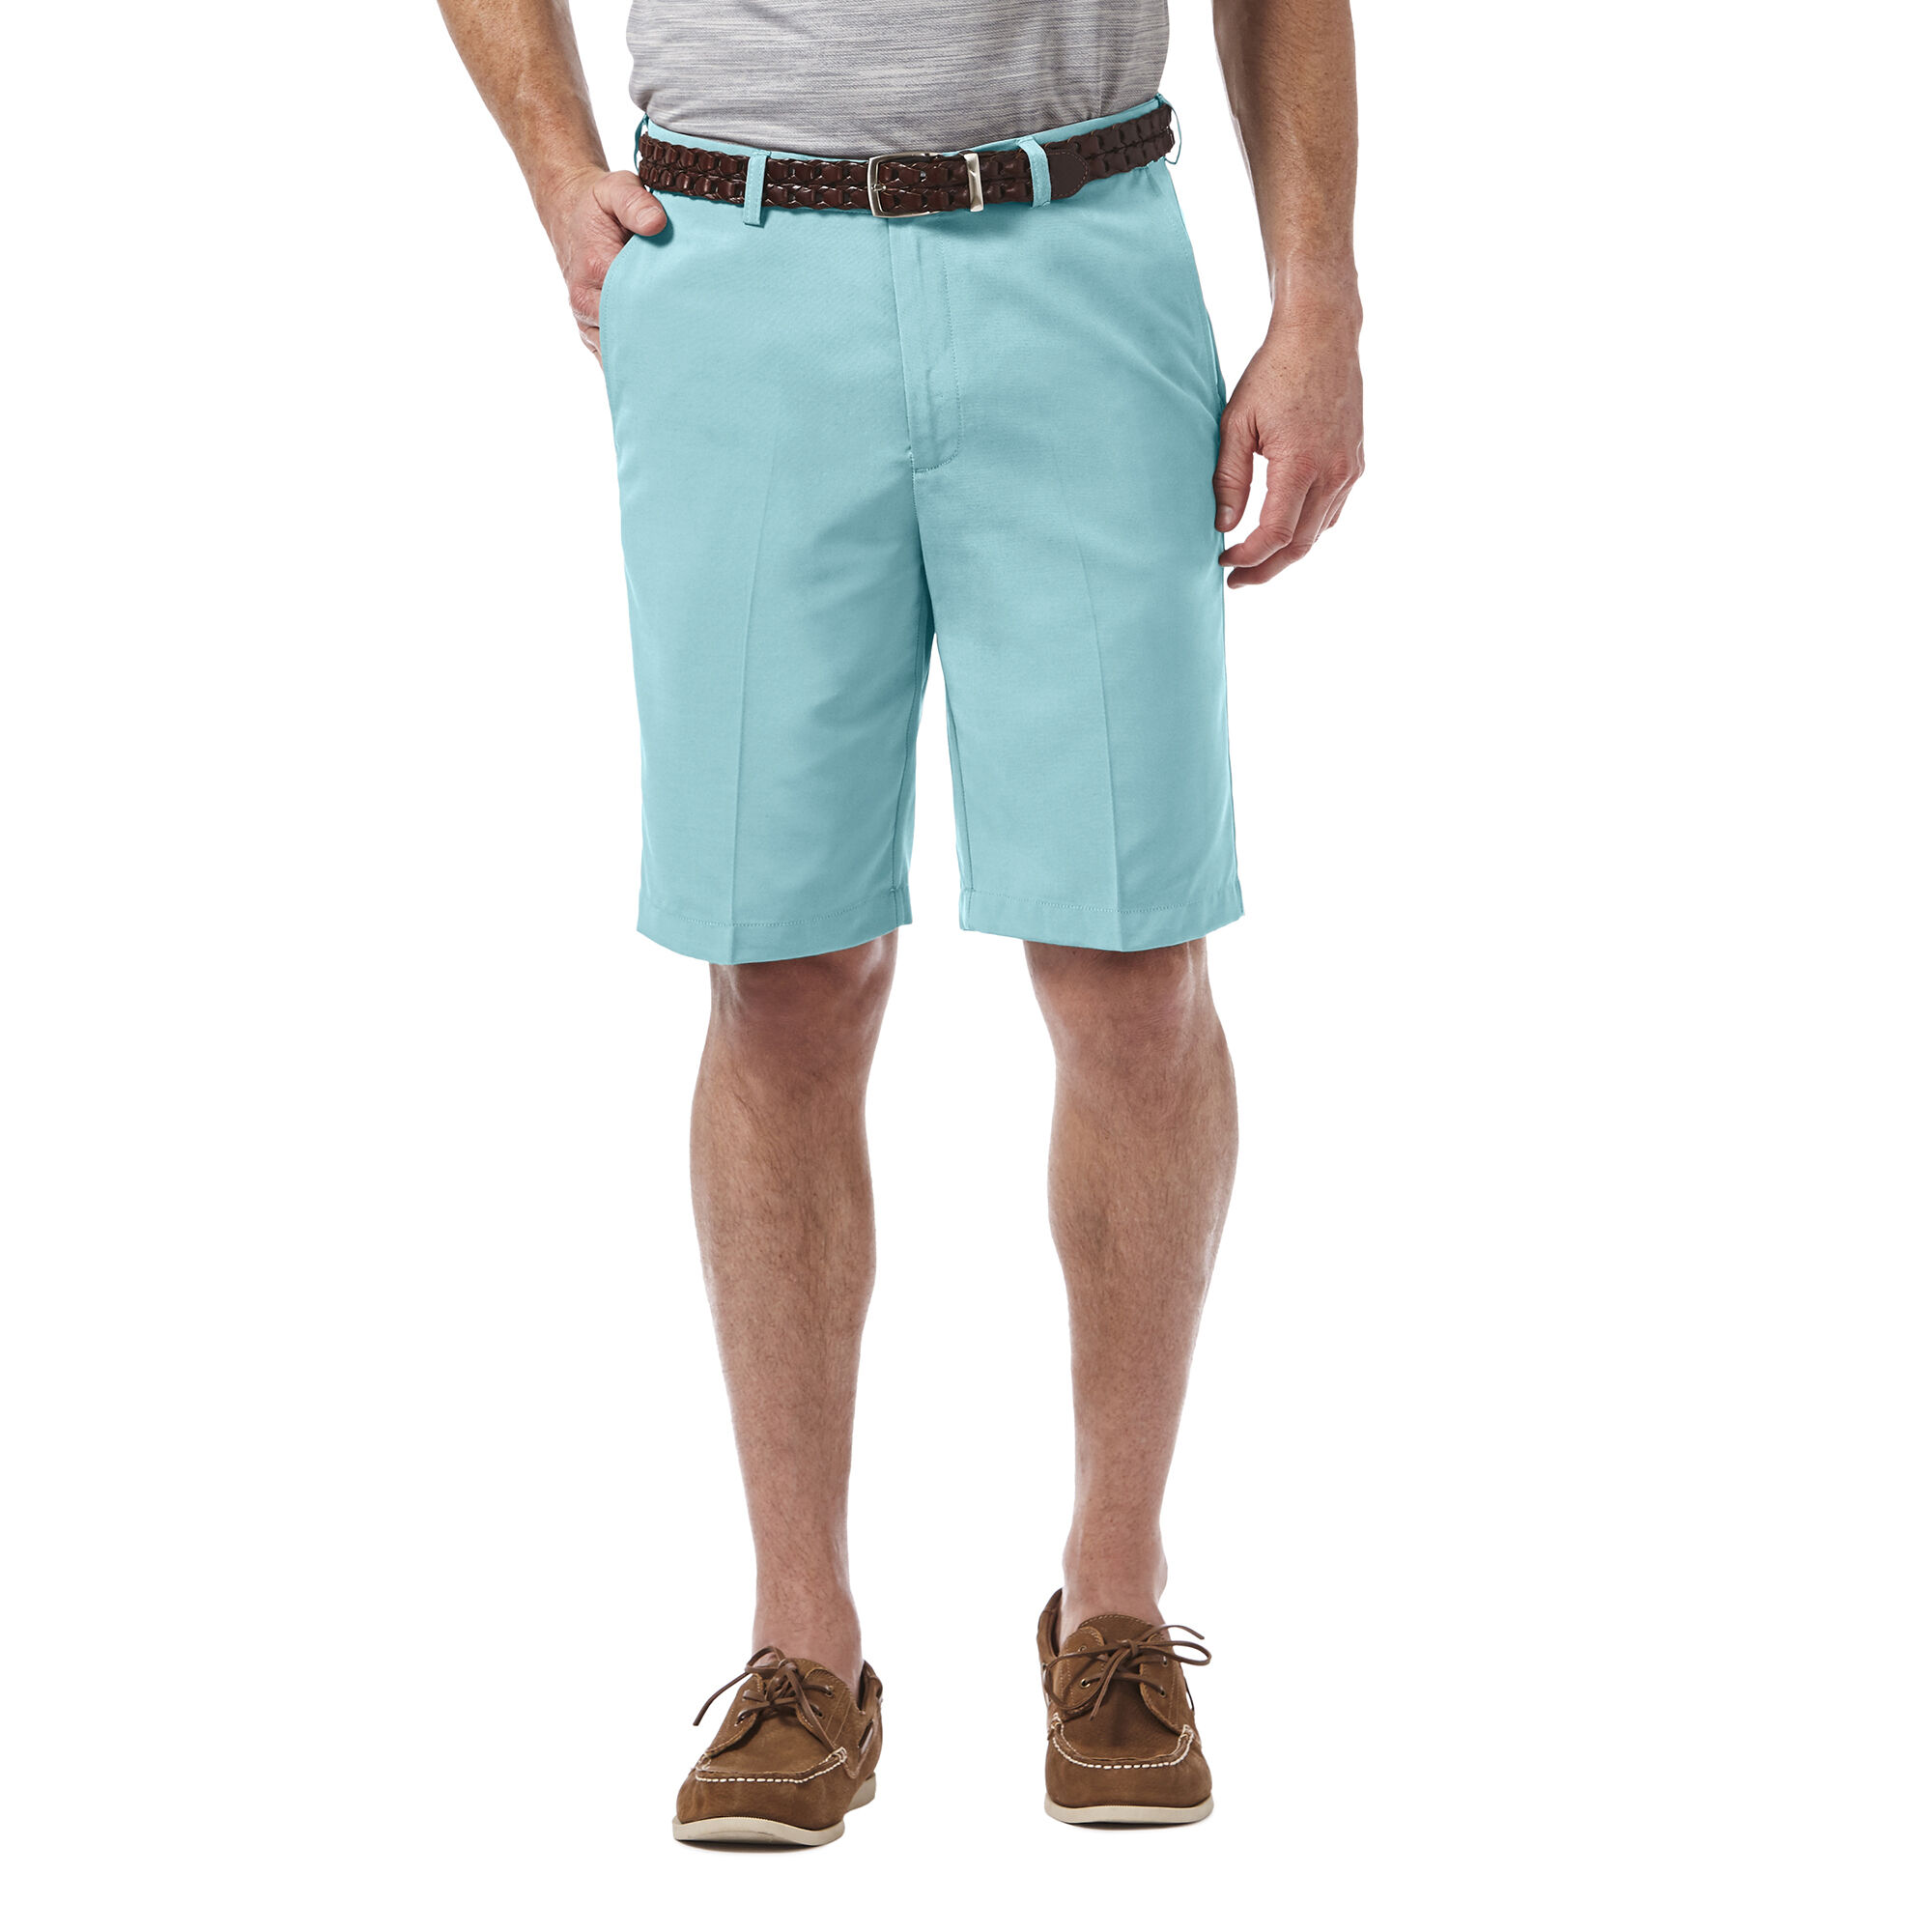 Haggar Cool 18 Oxford Short Turquoise (HS10402 Clothing Shorts) photo